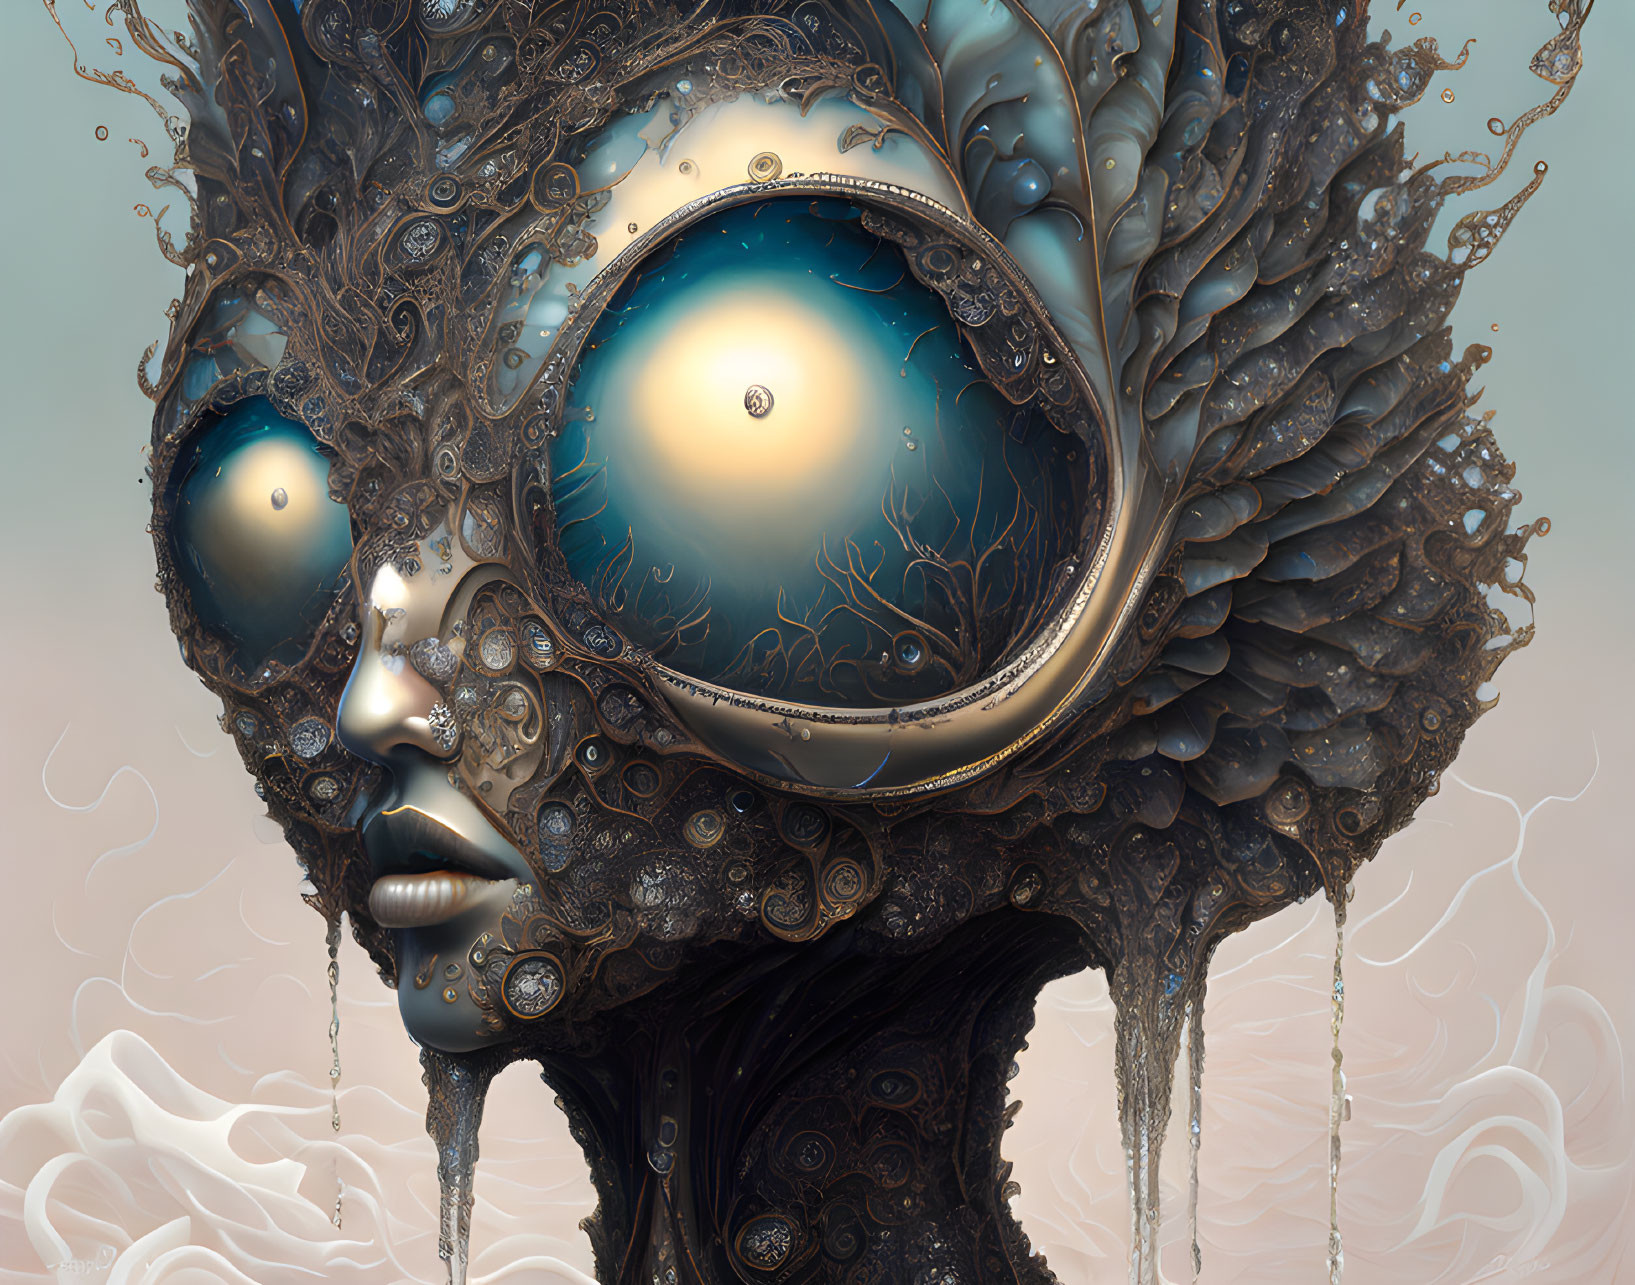 Surreal digital art: humanoid figure with ornate features and cosmic eyes